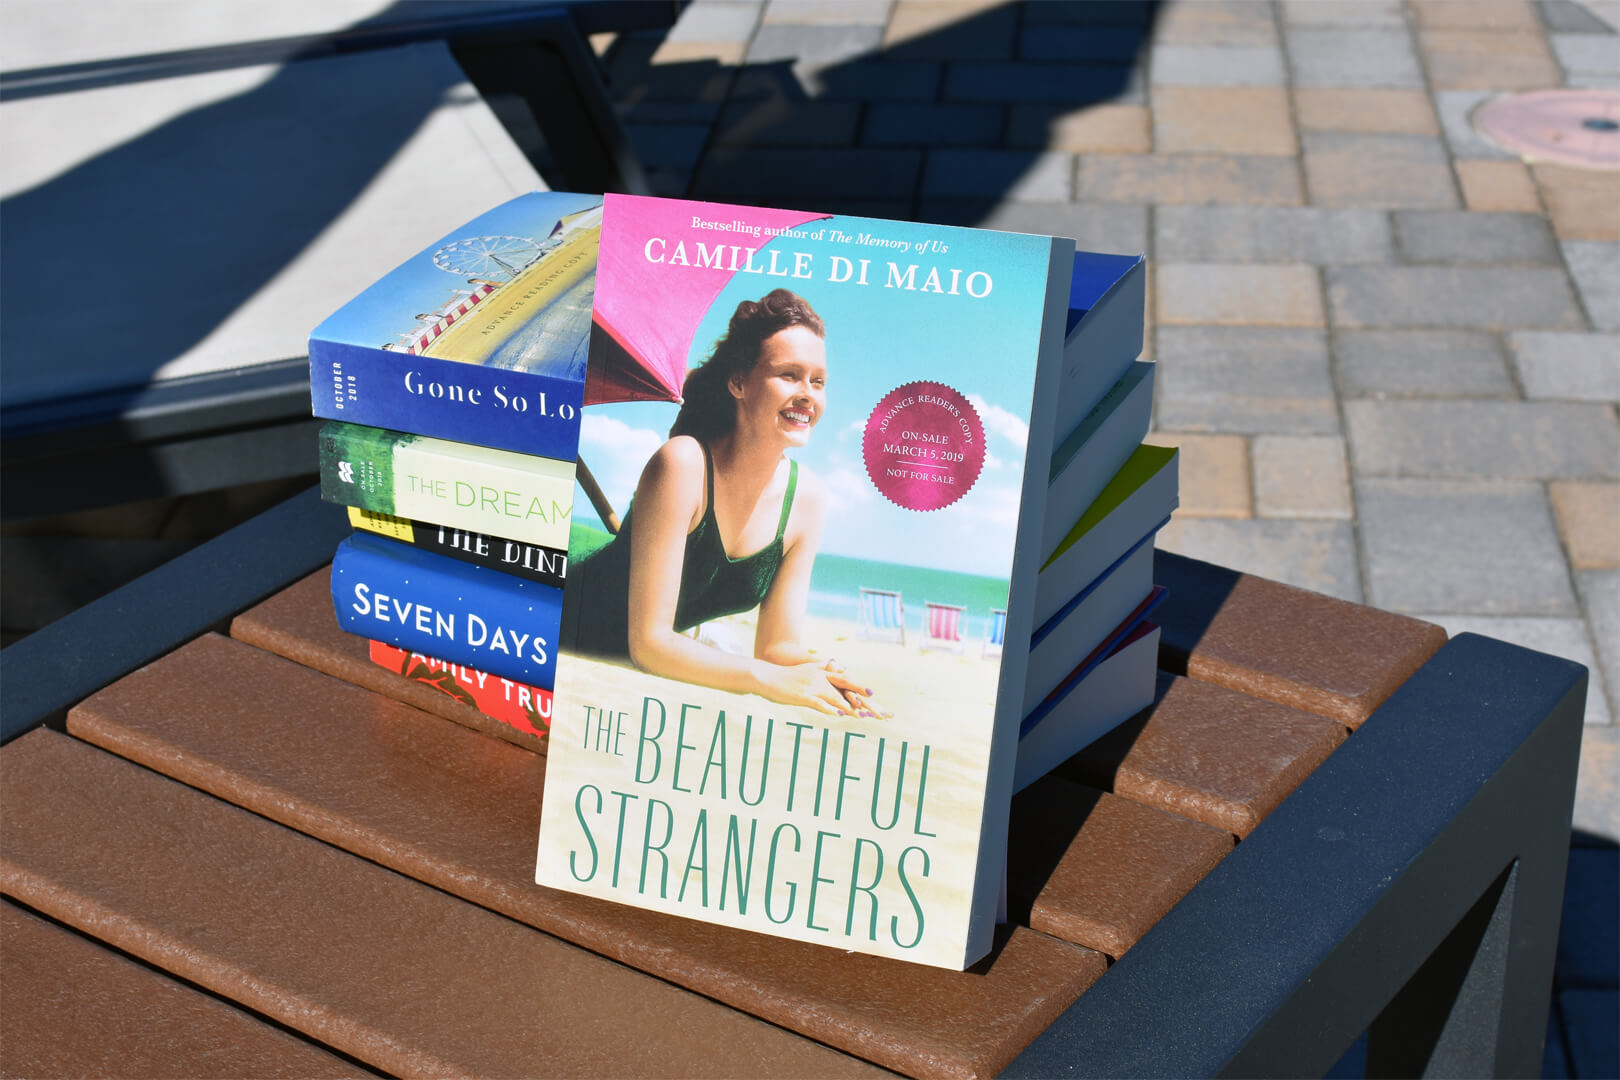 Preview: The Beautiful Strangers by Camille Di Maio